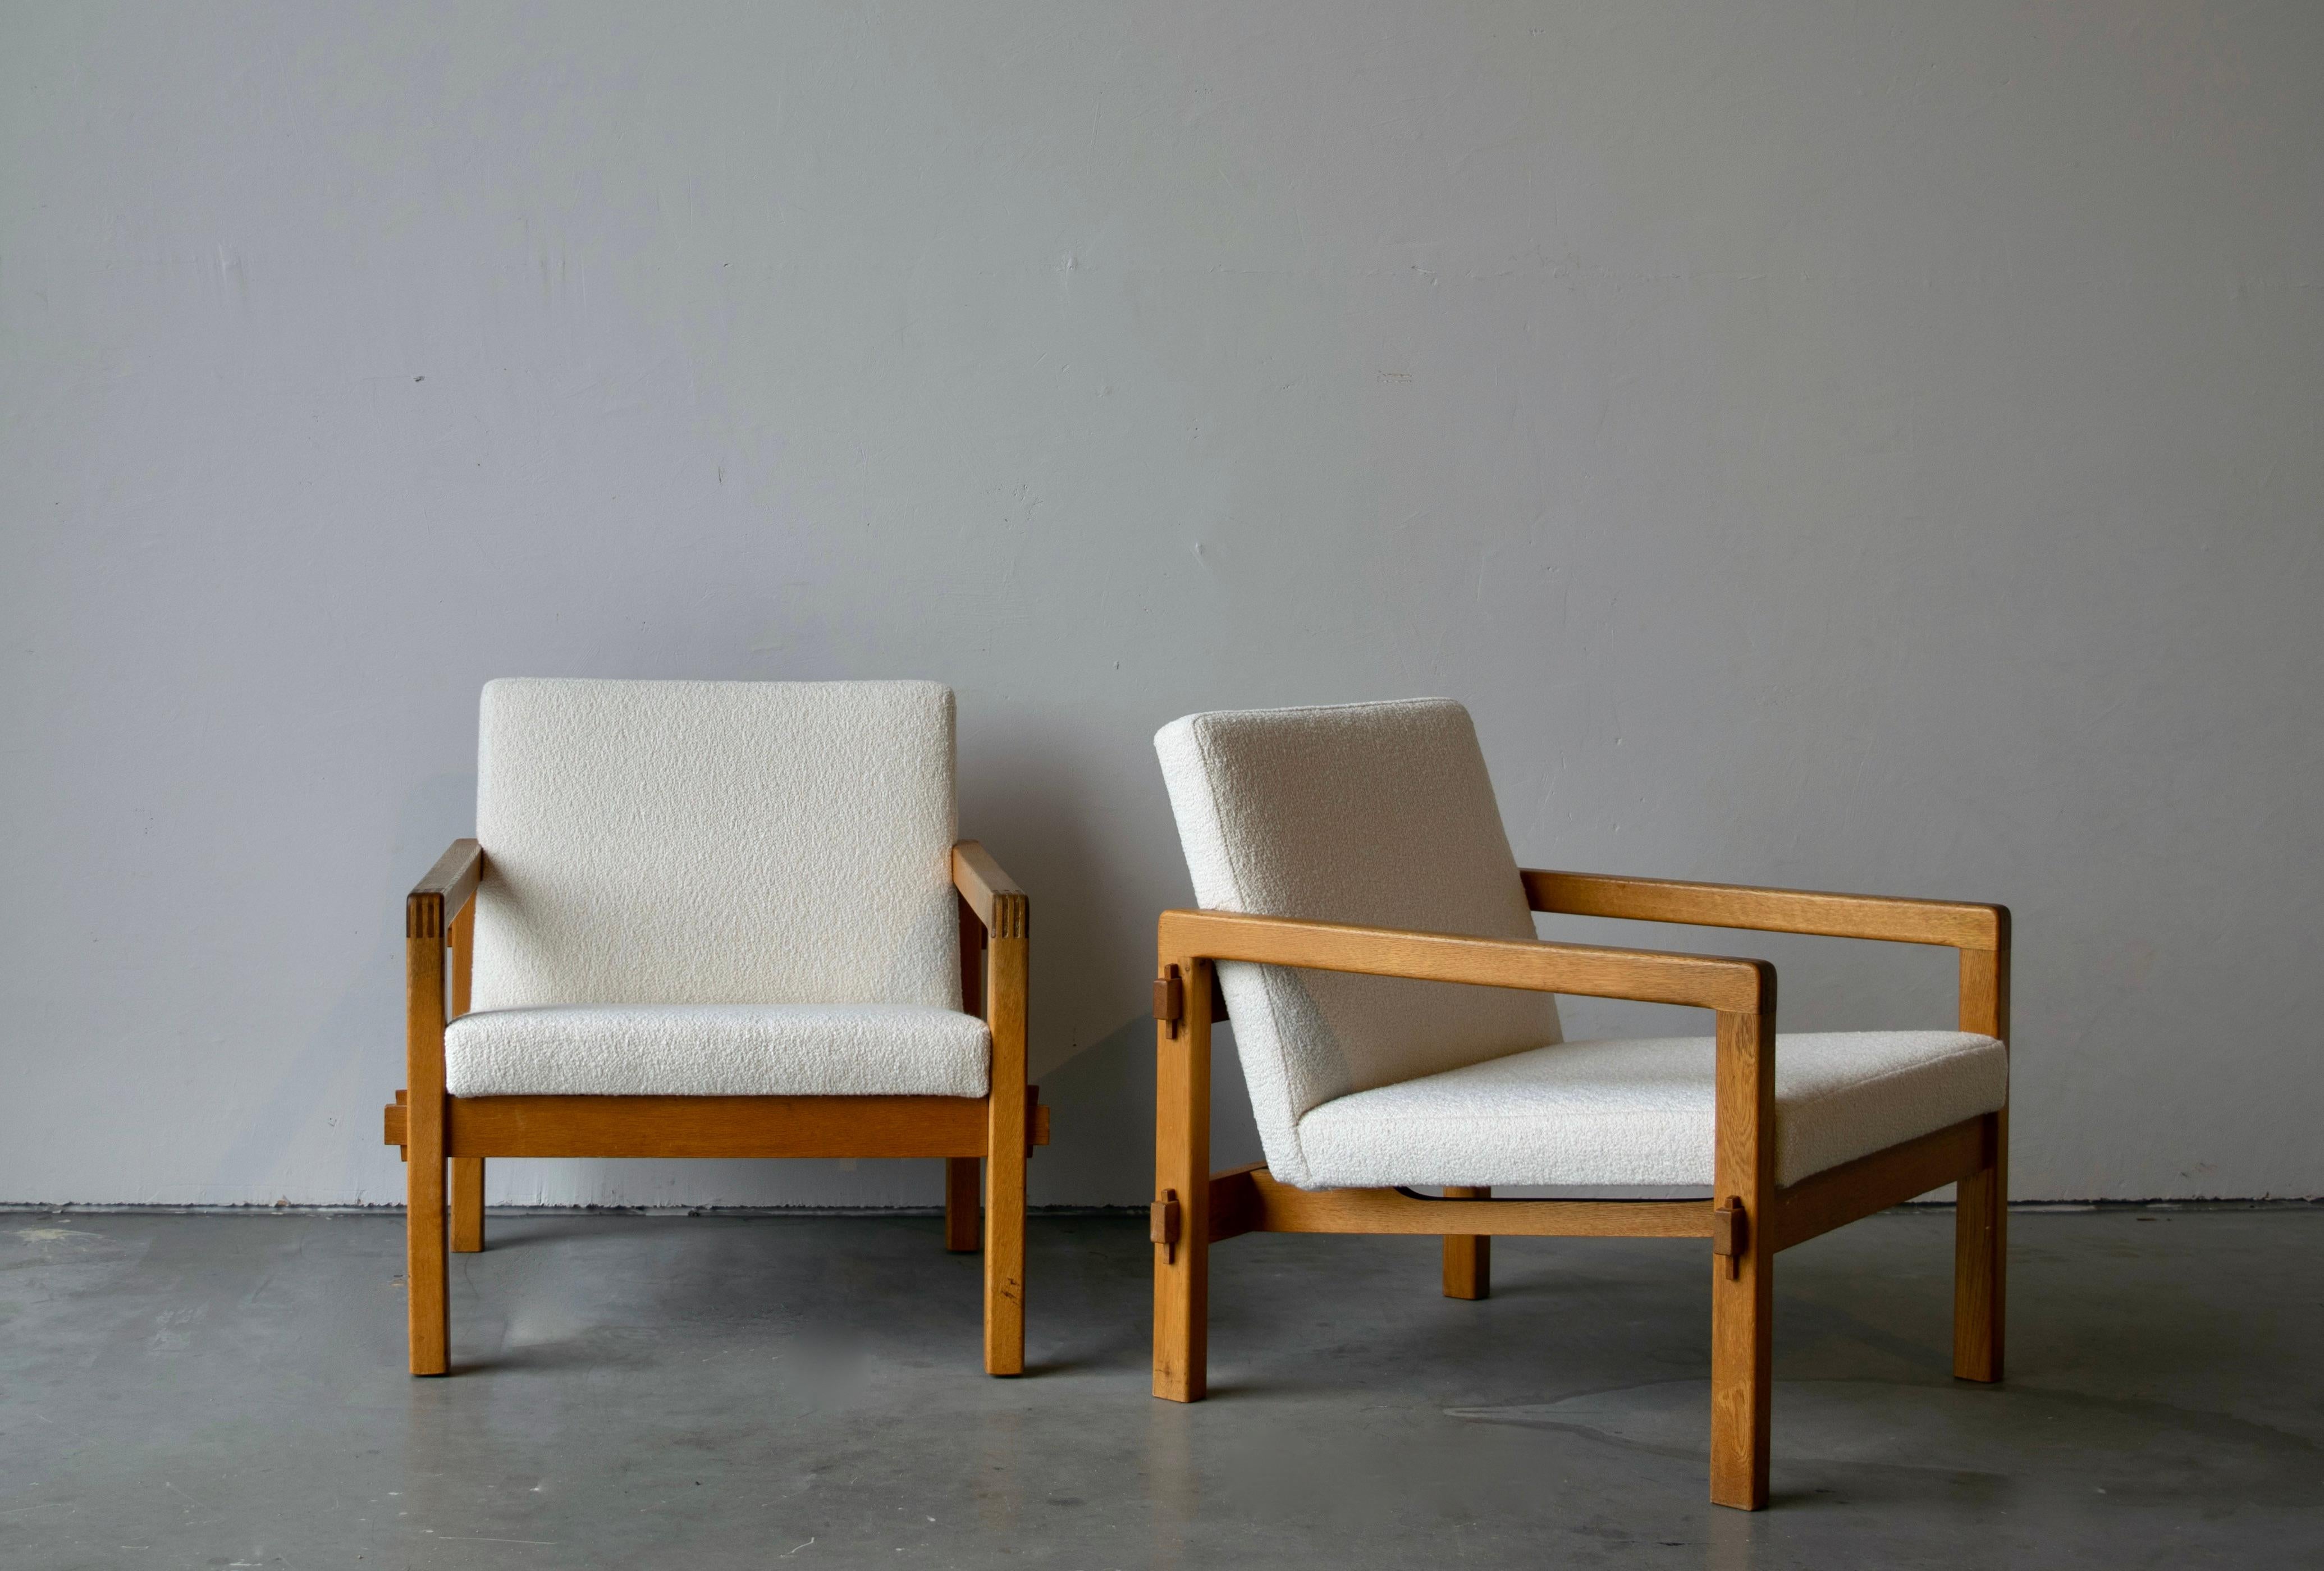 A pair of modernist lounge chairs. Designed by finnish designer Reino Ruokolainen in 1959, produced by Futura Möbler AB, Tibro. In solid oak, with revealed joinery. Reupholstered in brand new high-end bouclé fabric.

Other designers of the period